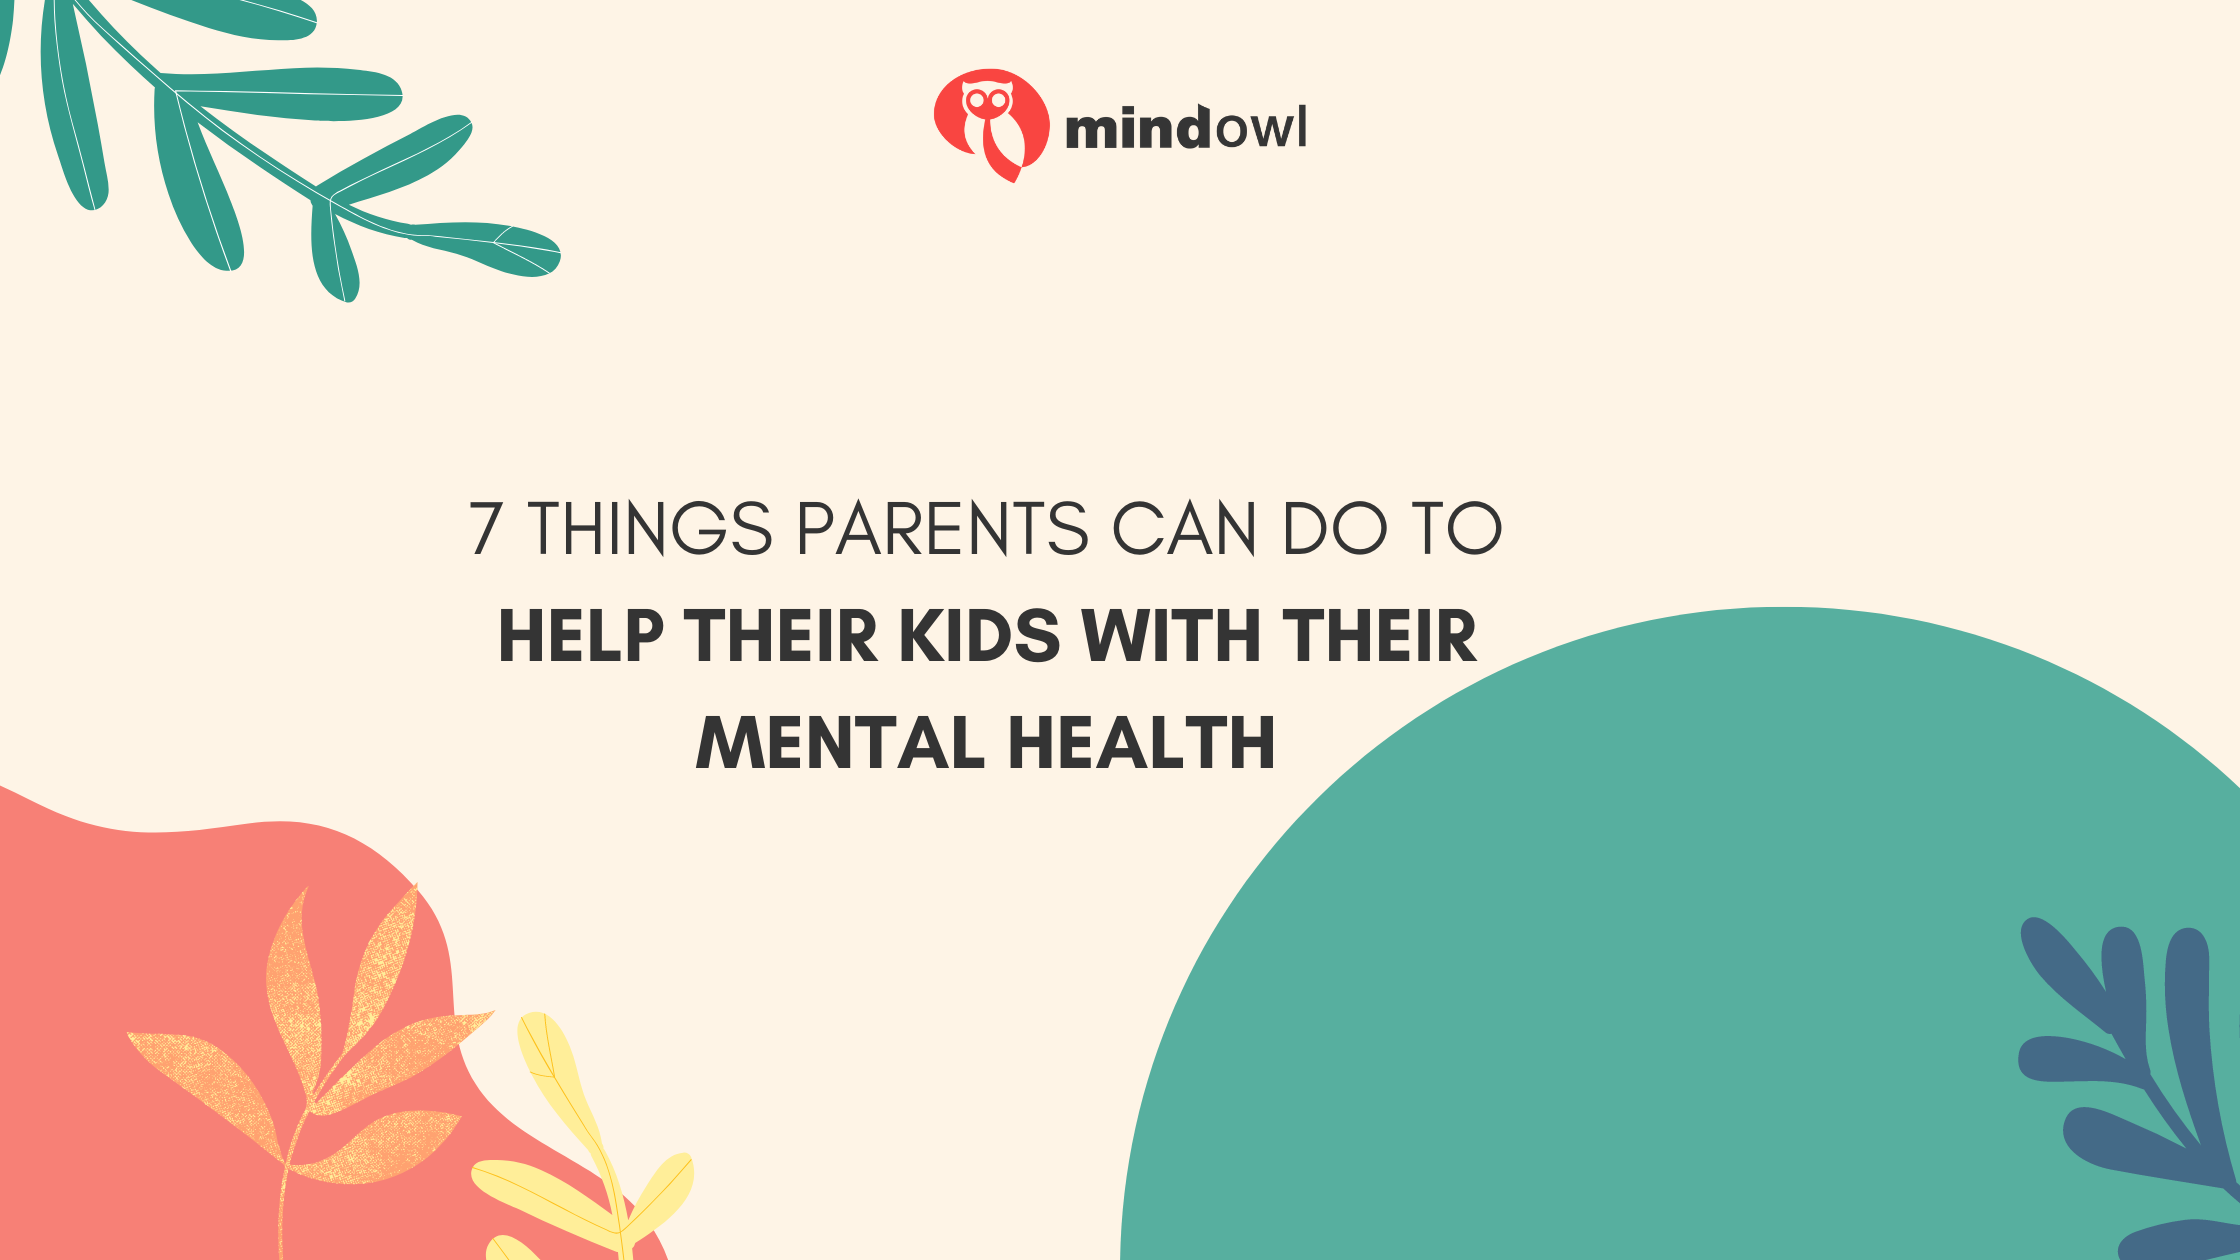 7 Things Parents Can Do to Help Their Kids with Their Mental Health